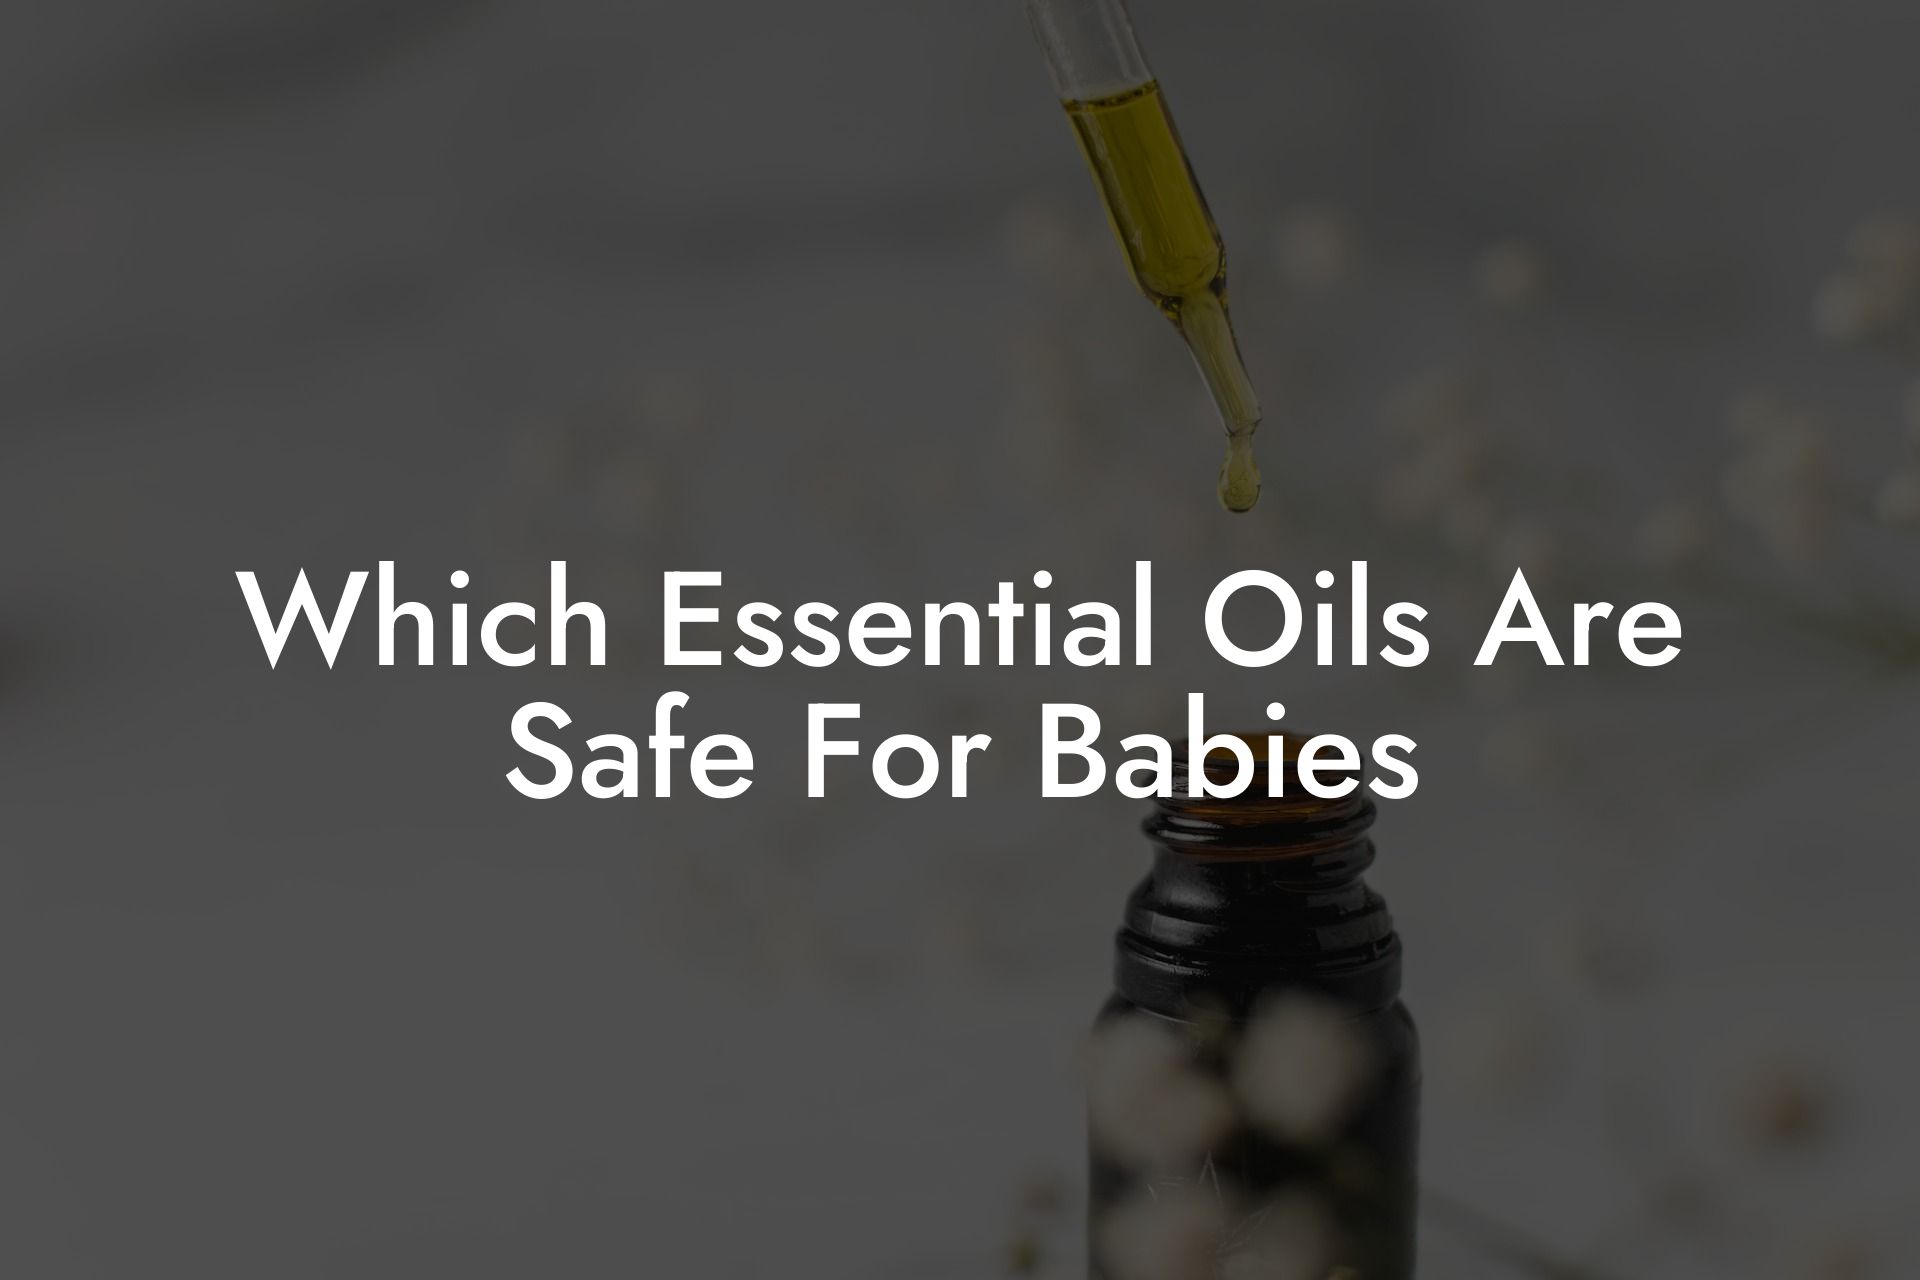 Which Essential Oils Are Safe For Babies